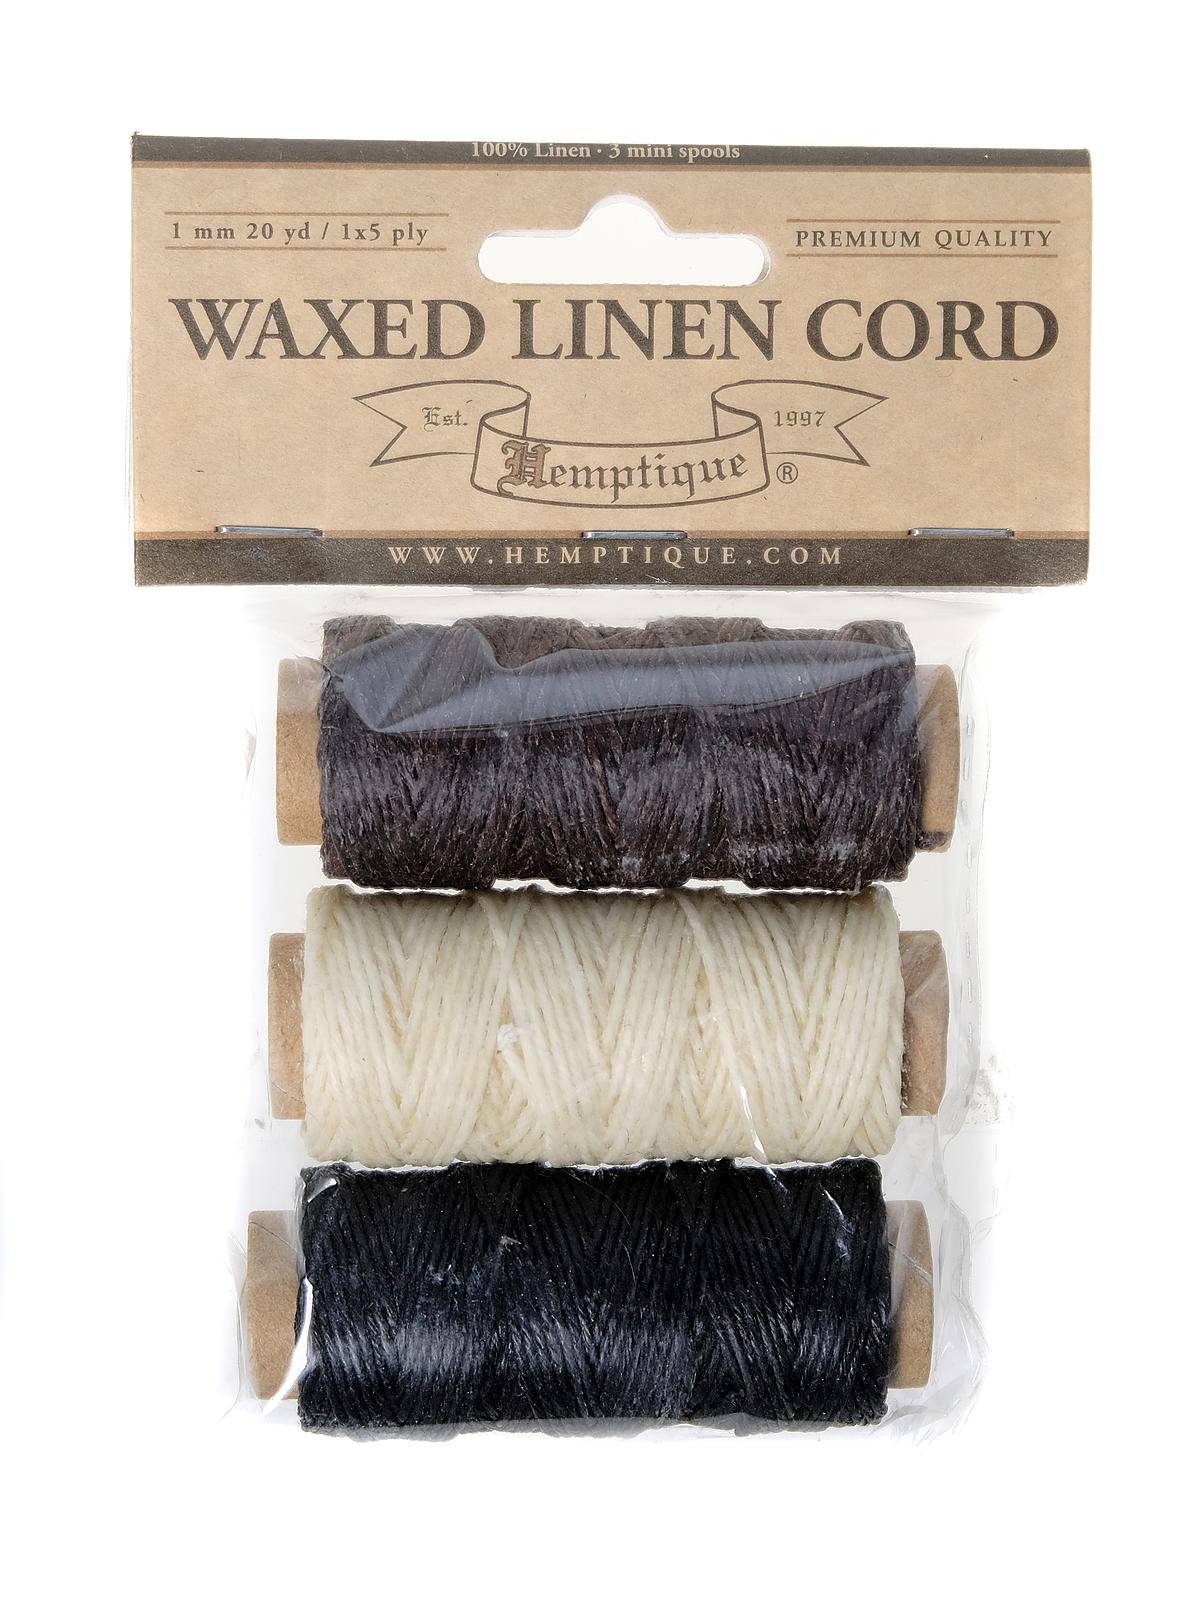 Waxed Linen Cord Dark Brown, Black, Natural 1 Mm X 20 Yds. Pack Of 3 Spools